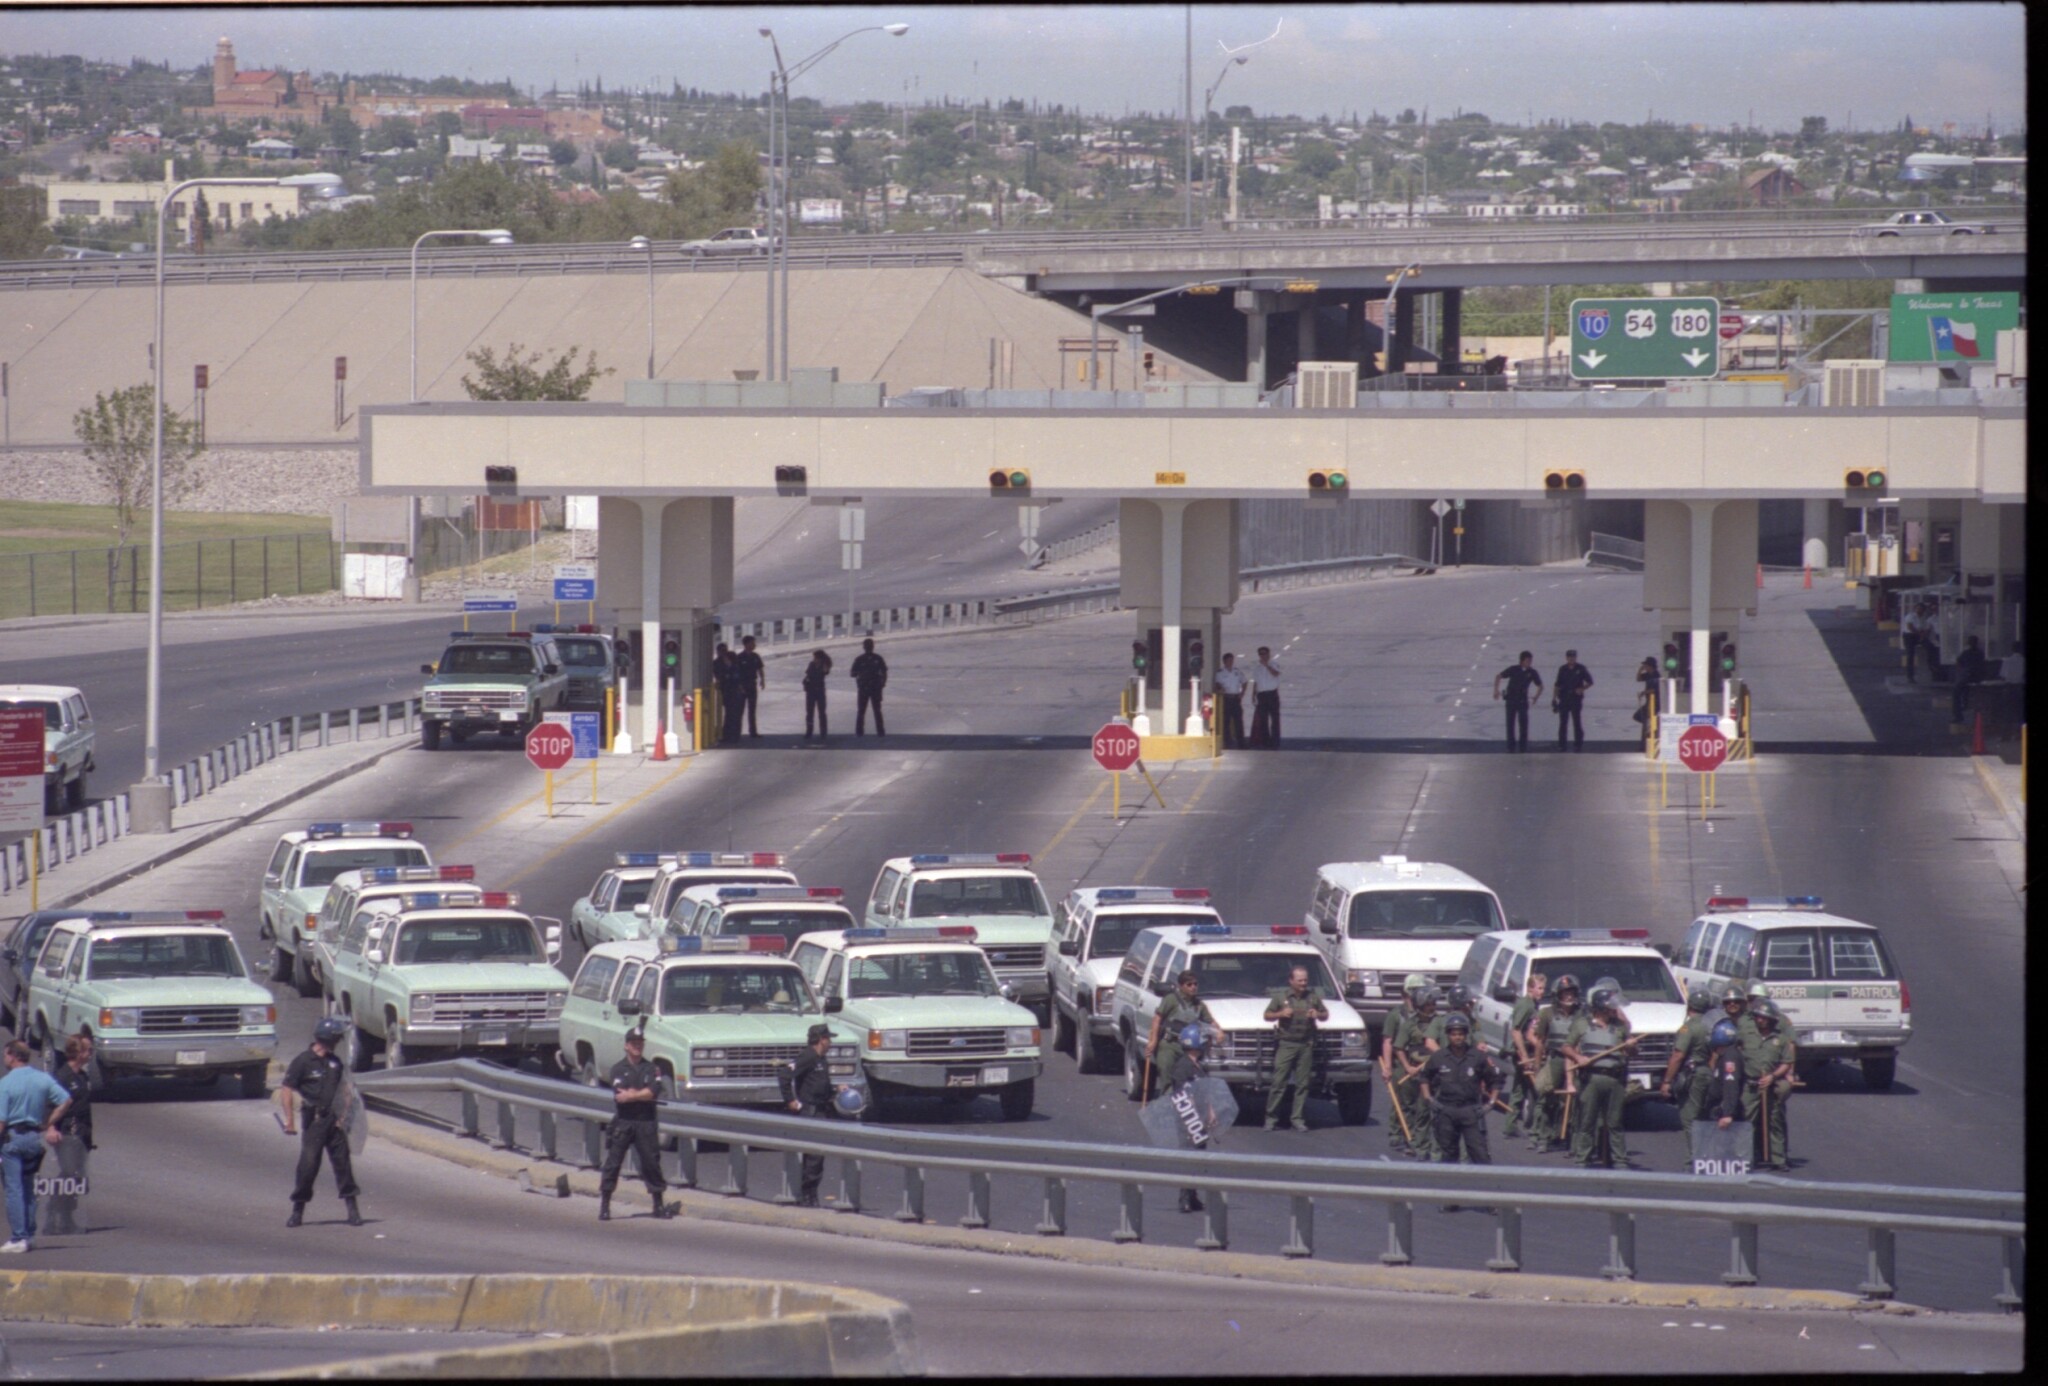 The 1993 border blockade during Operation Hold the Line in El Paso, Texas.